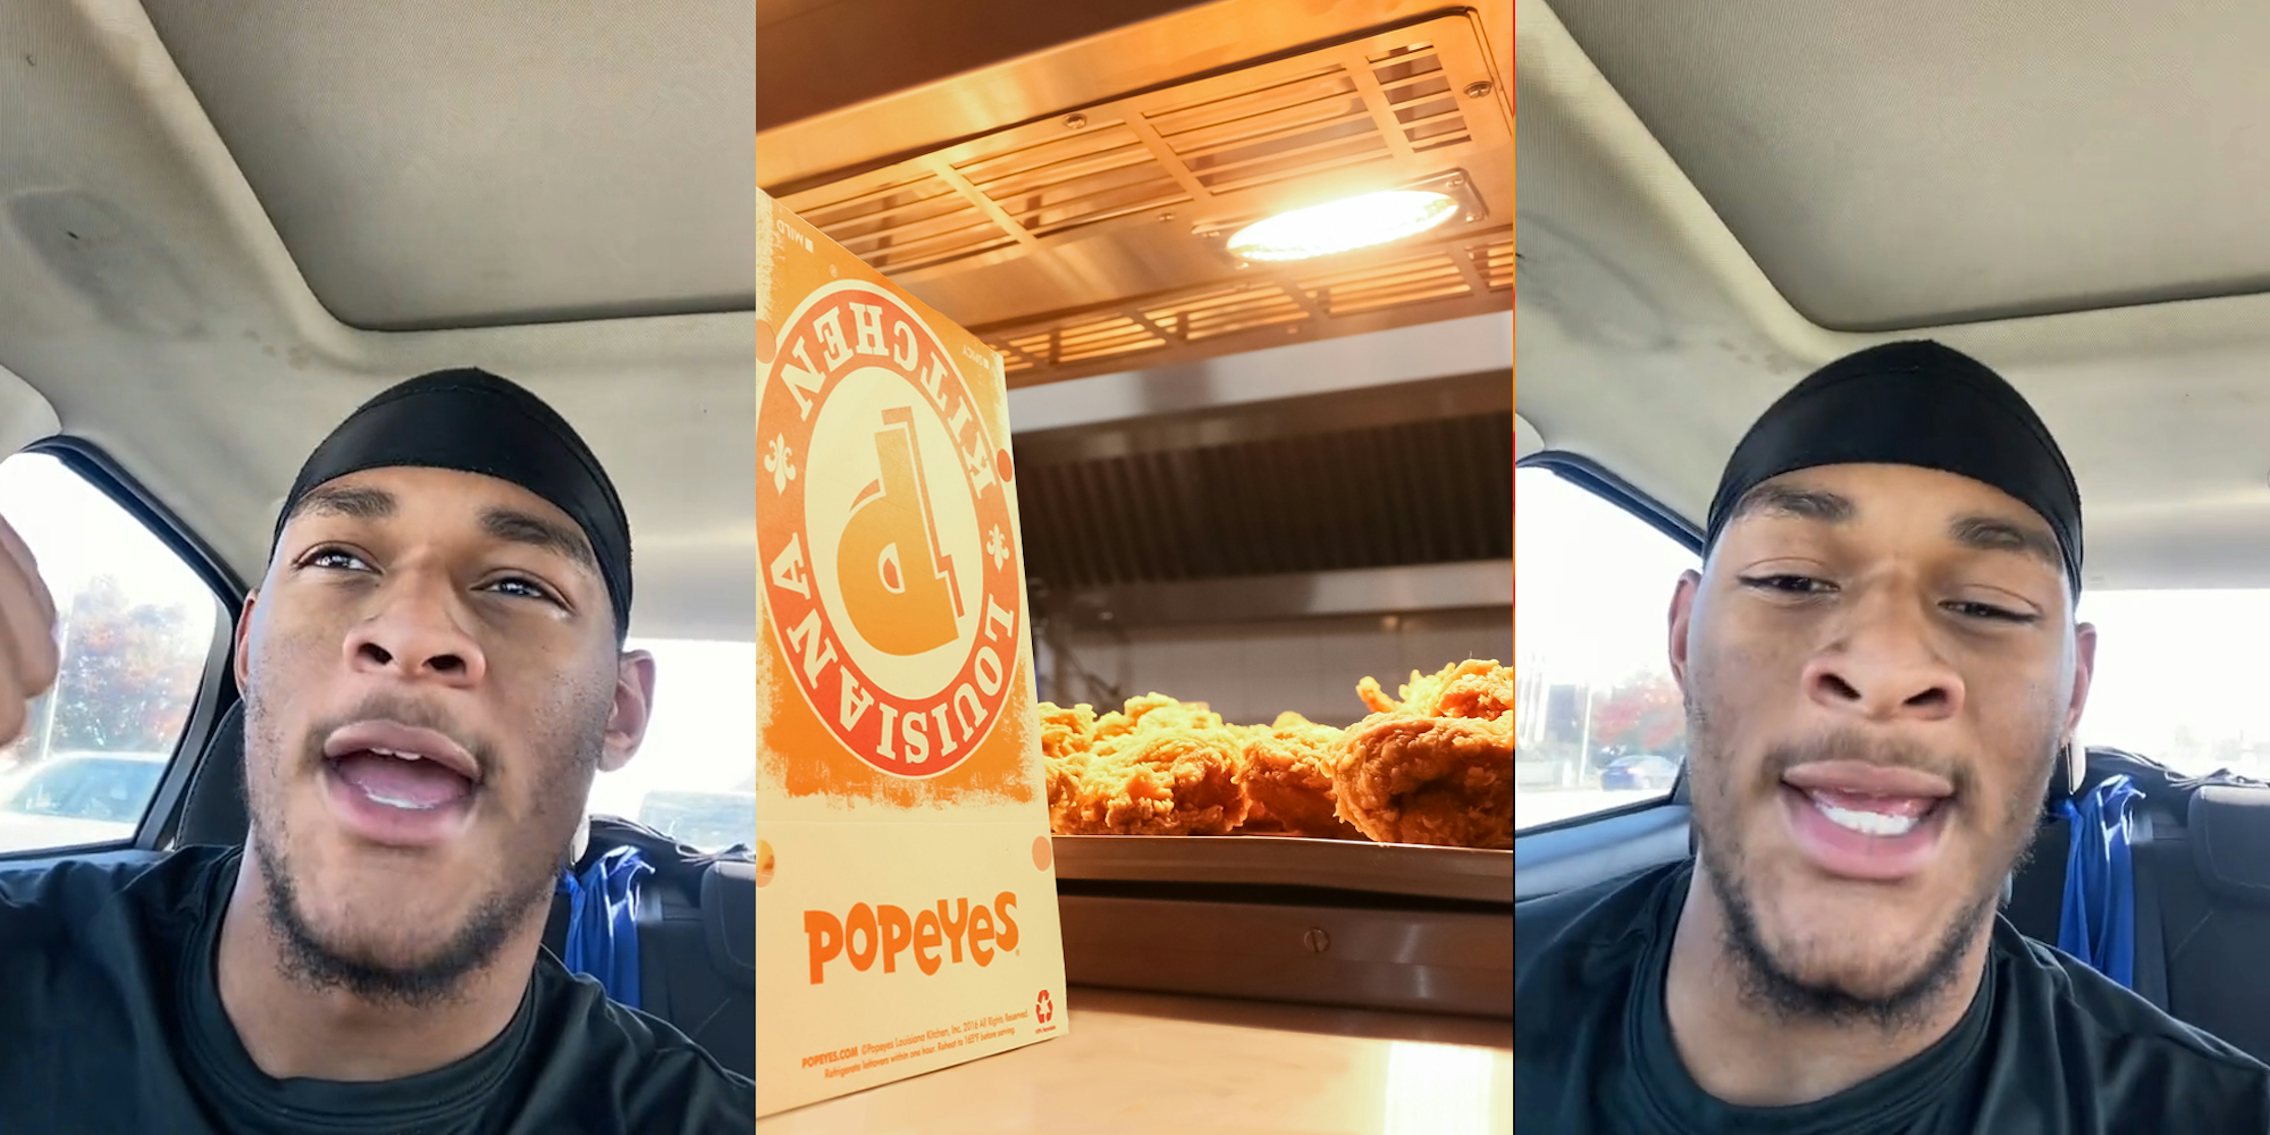 man speaking in car with hand up (l) Popeyes fried chicken in kitchen with paper sign on counter (c) man speaking in car (r)